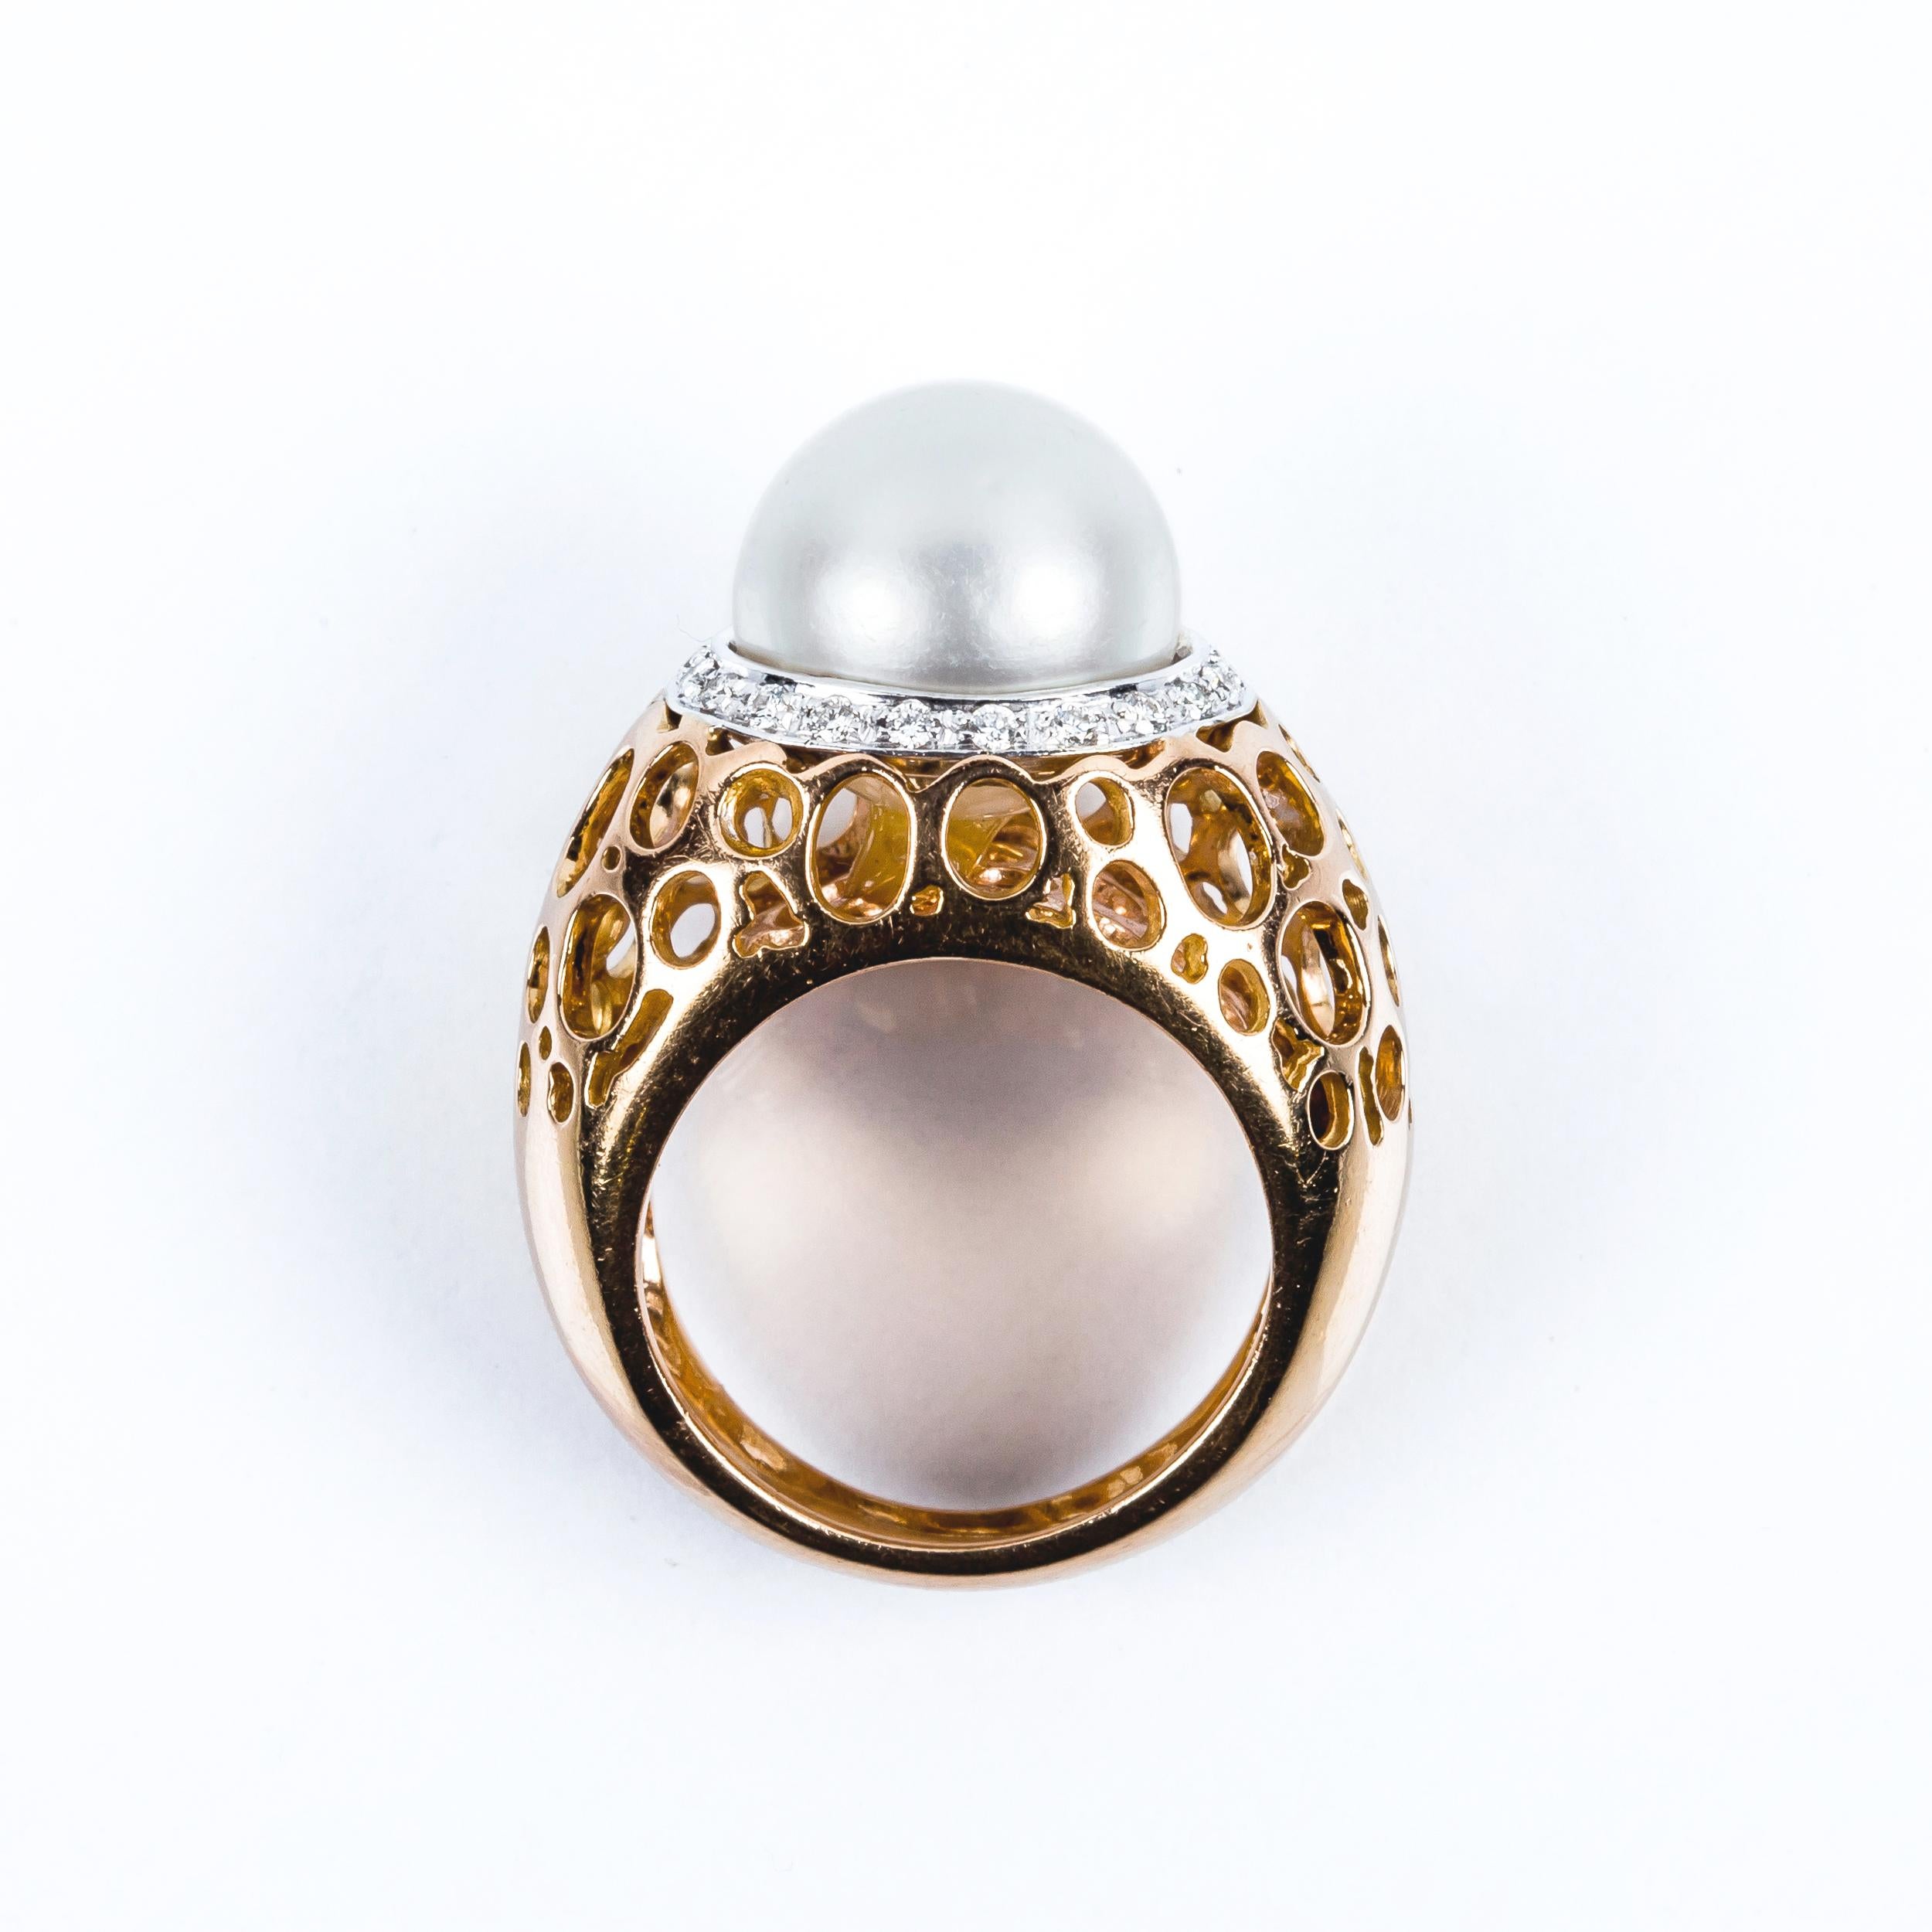 High Jewelry Design 18kt gold ring 
Natural Australian 12mm/  0.4724inches  pearl with very good proportions and light grey colour 
Halo Nest of 20 diamonds in 18kt white gold that total 0.1ct 
The structure of the ring is in 18kt rose gold and has